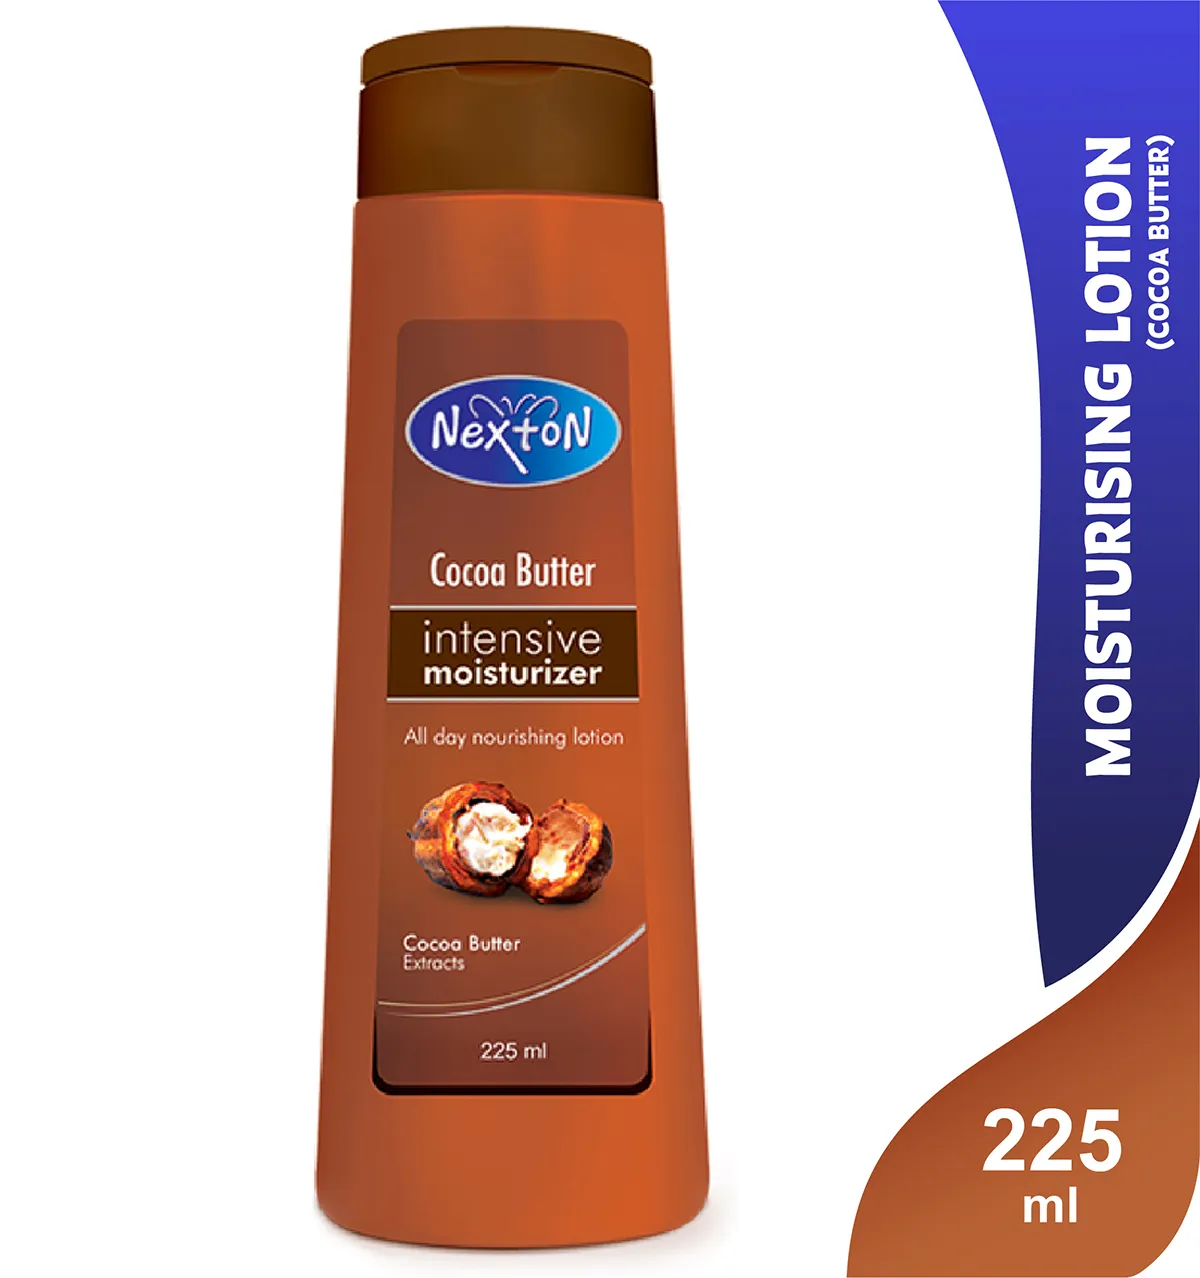 Nexton Lotion Cocoa Butter 225ml